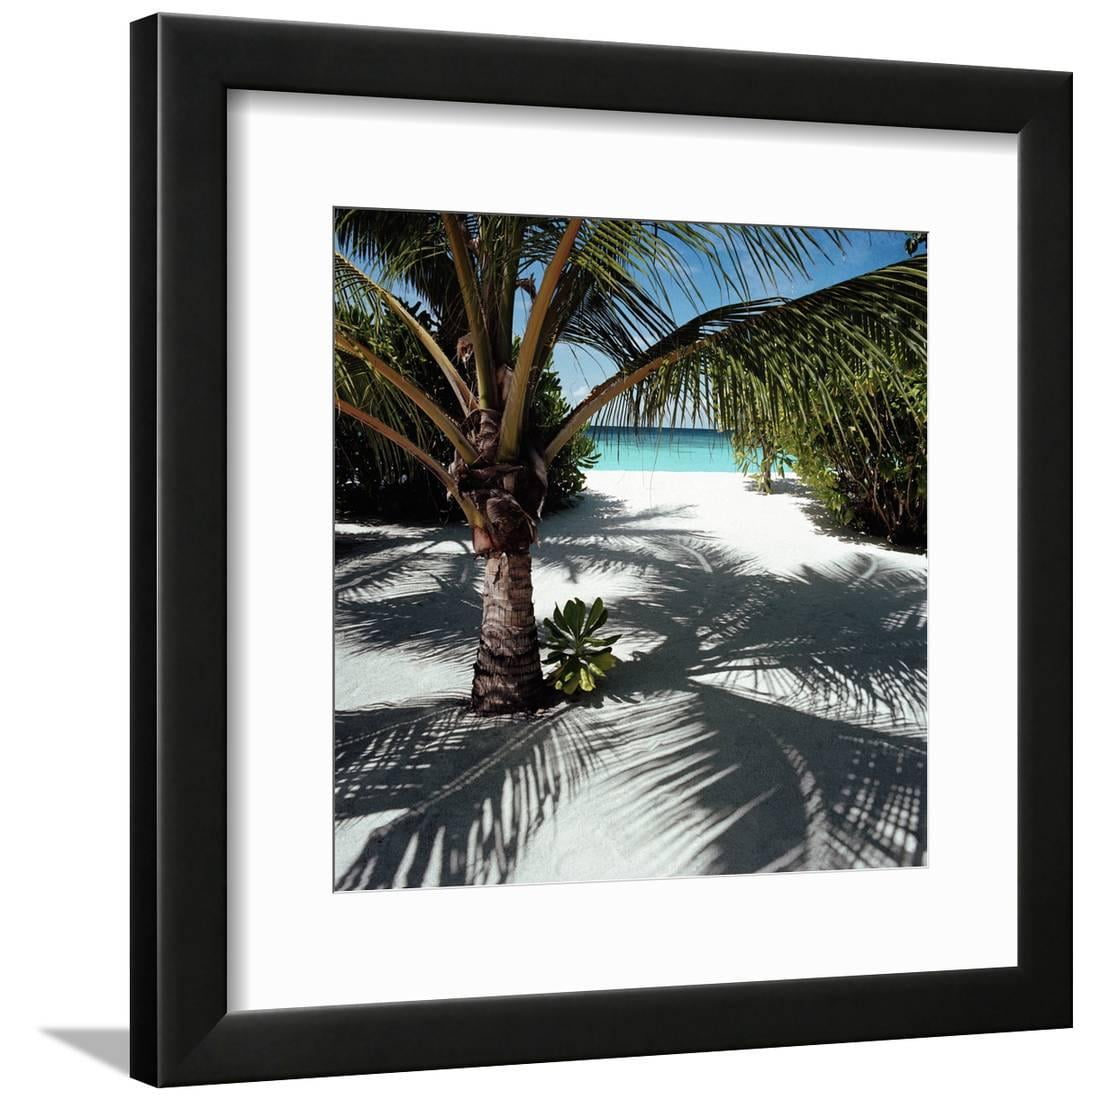 19x23 Tropical Sunset & Palm Tree Landscape Scenery Wall Decor Framed Picture 